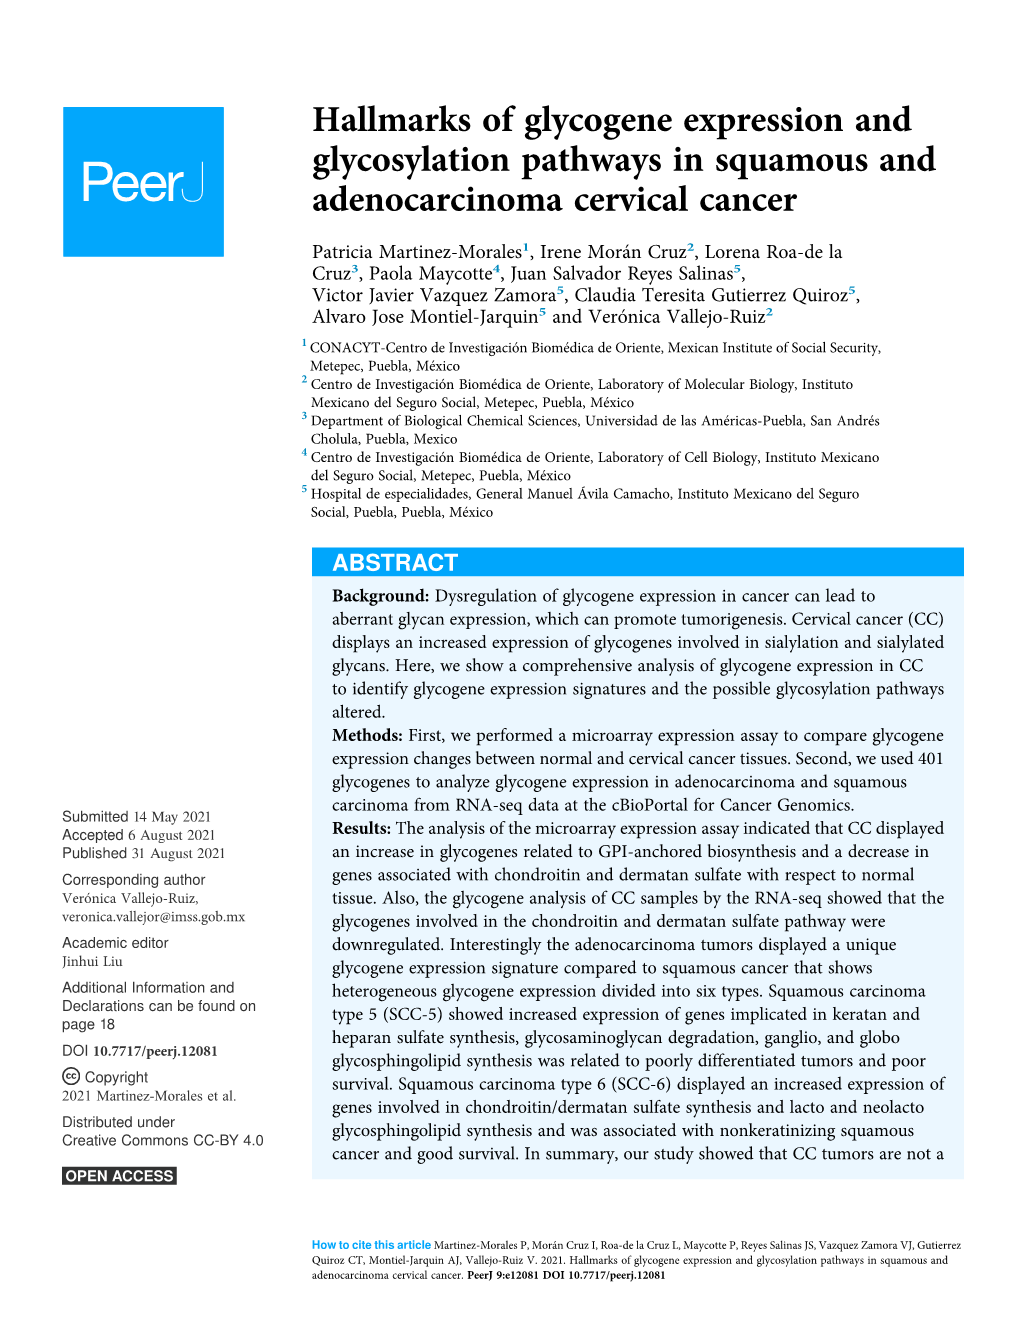 Hallmarks of Glycogene Expression and Glycosylation Pathways in Squamous and Adenocarcinoma Cervical Cancer